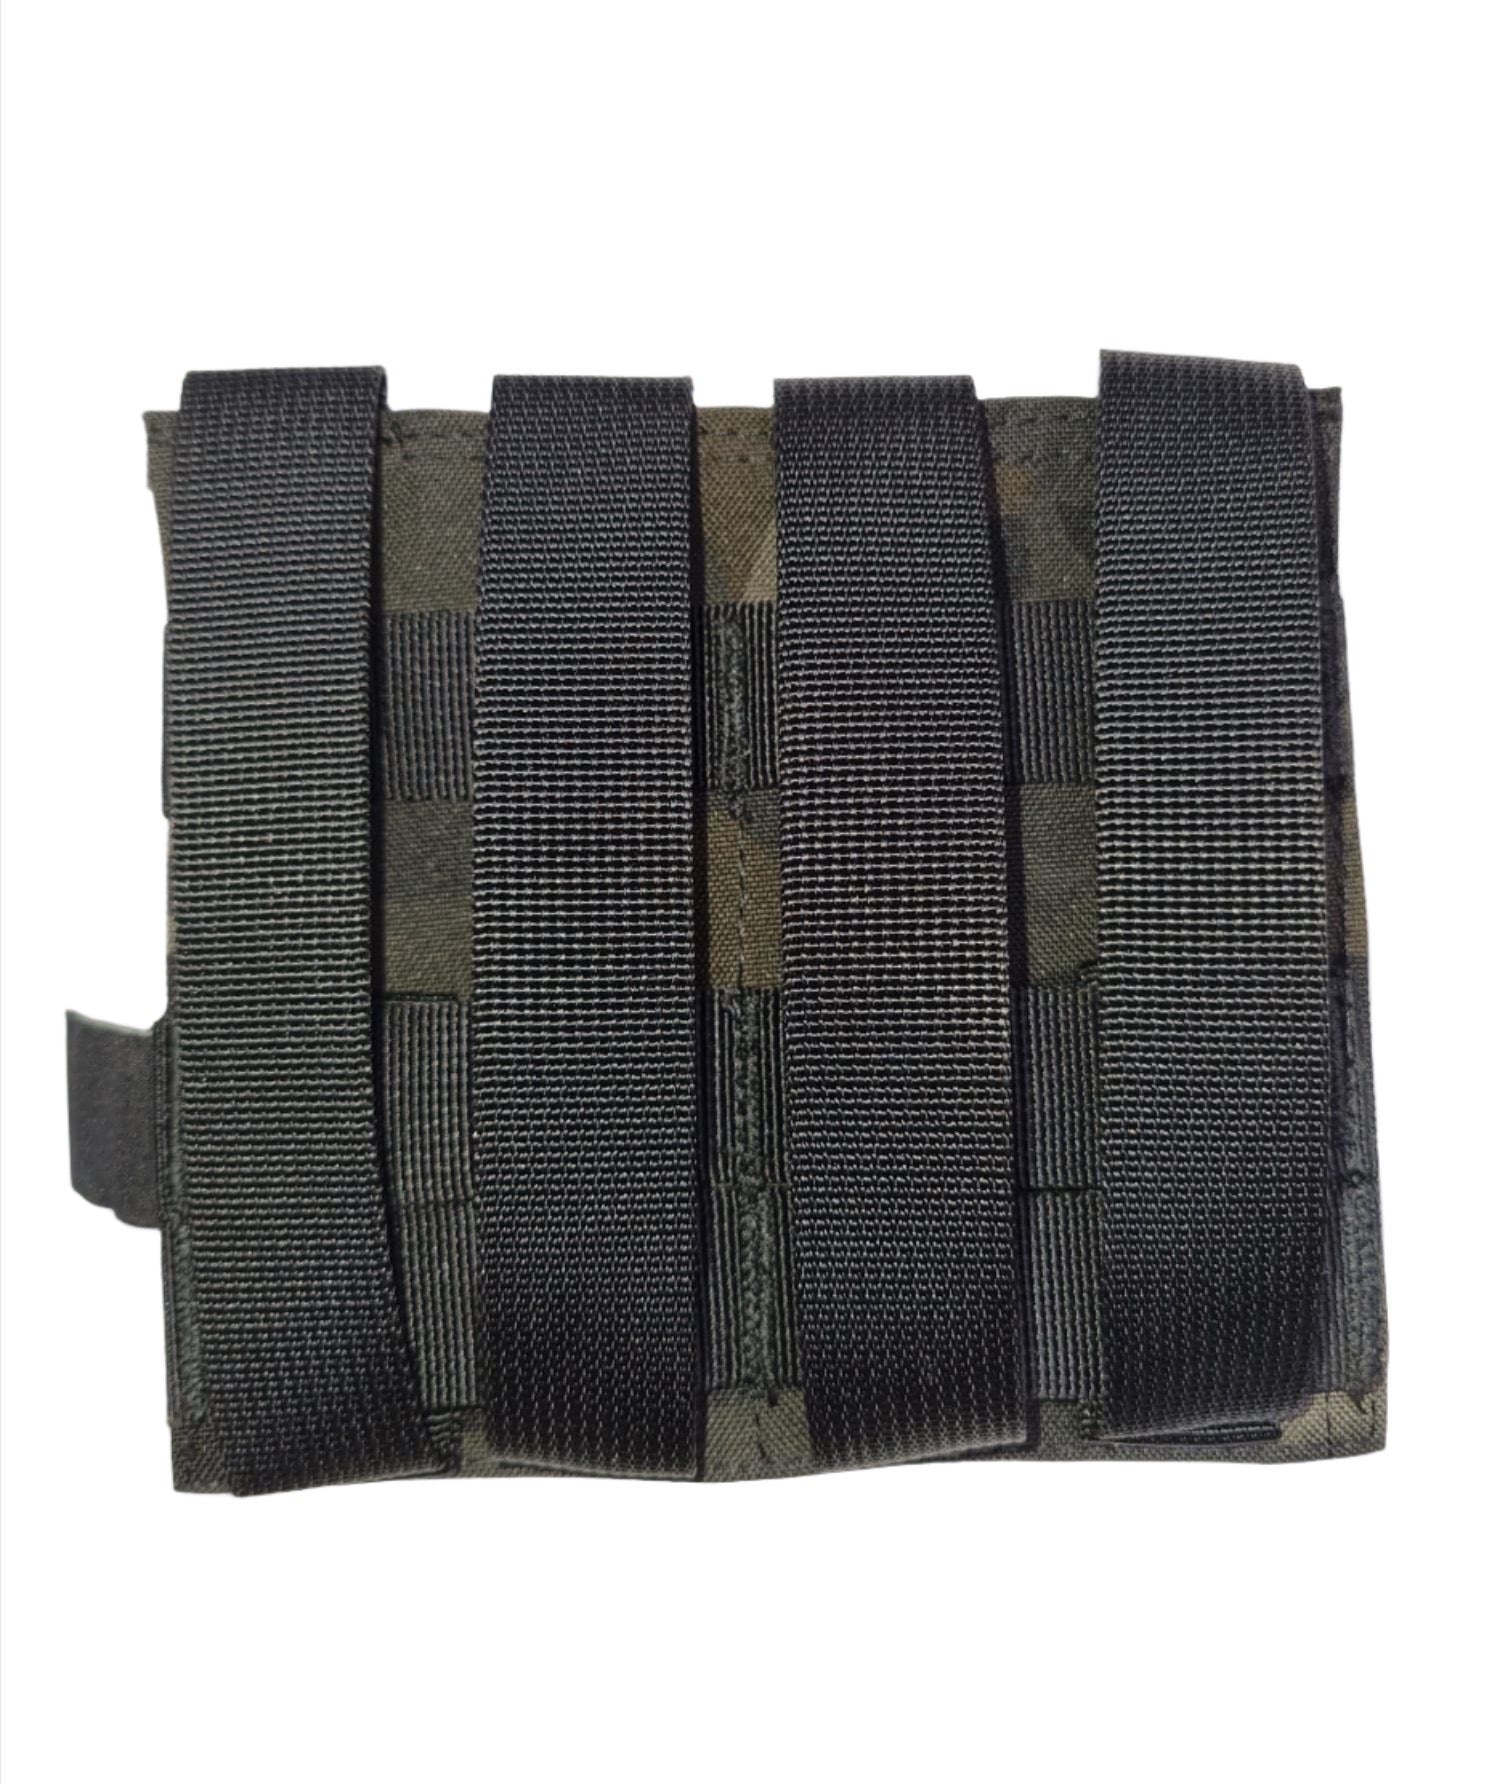 SHE-21088 Double Mag Pouch Open top MULTICAM BLACK